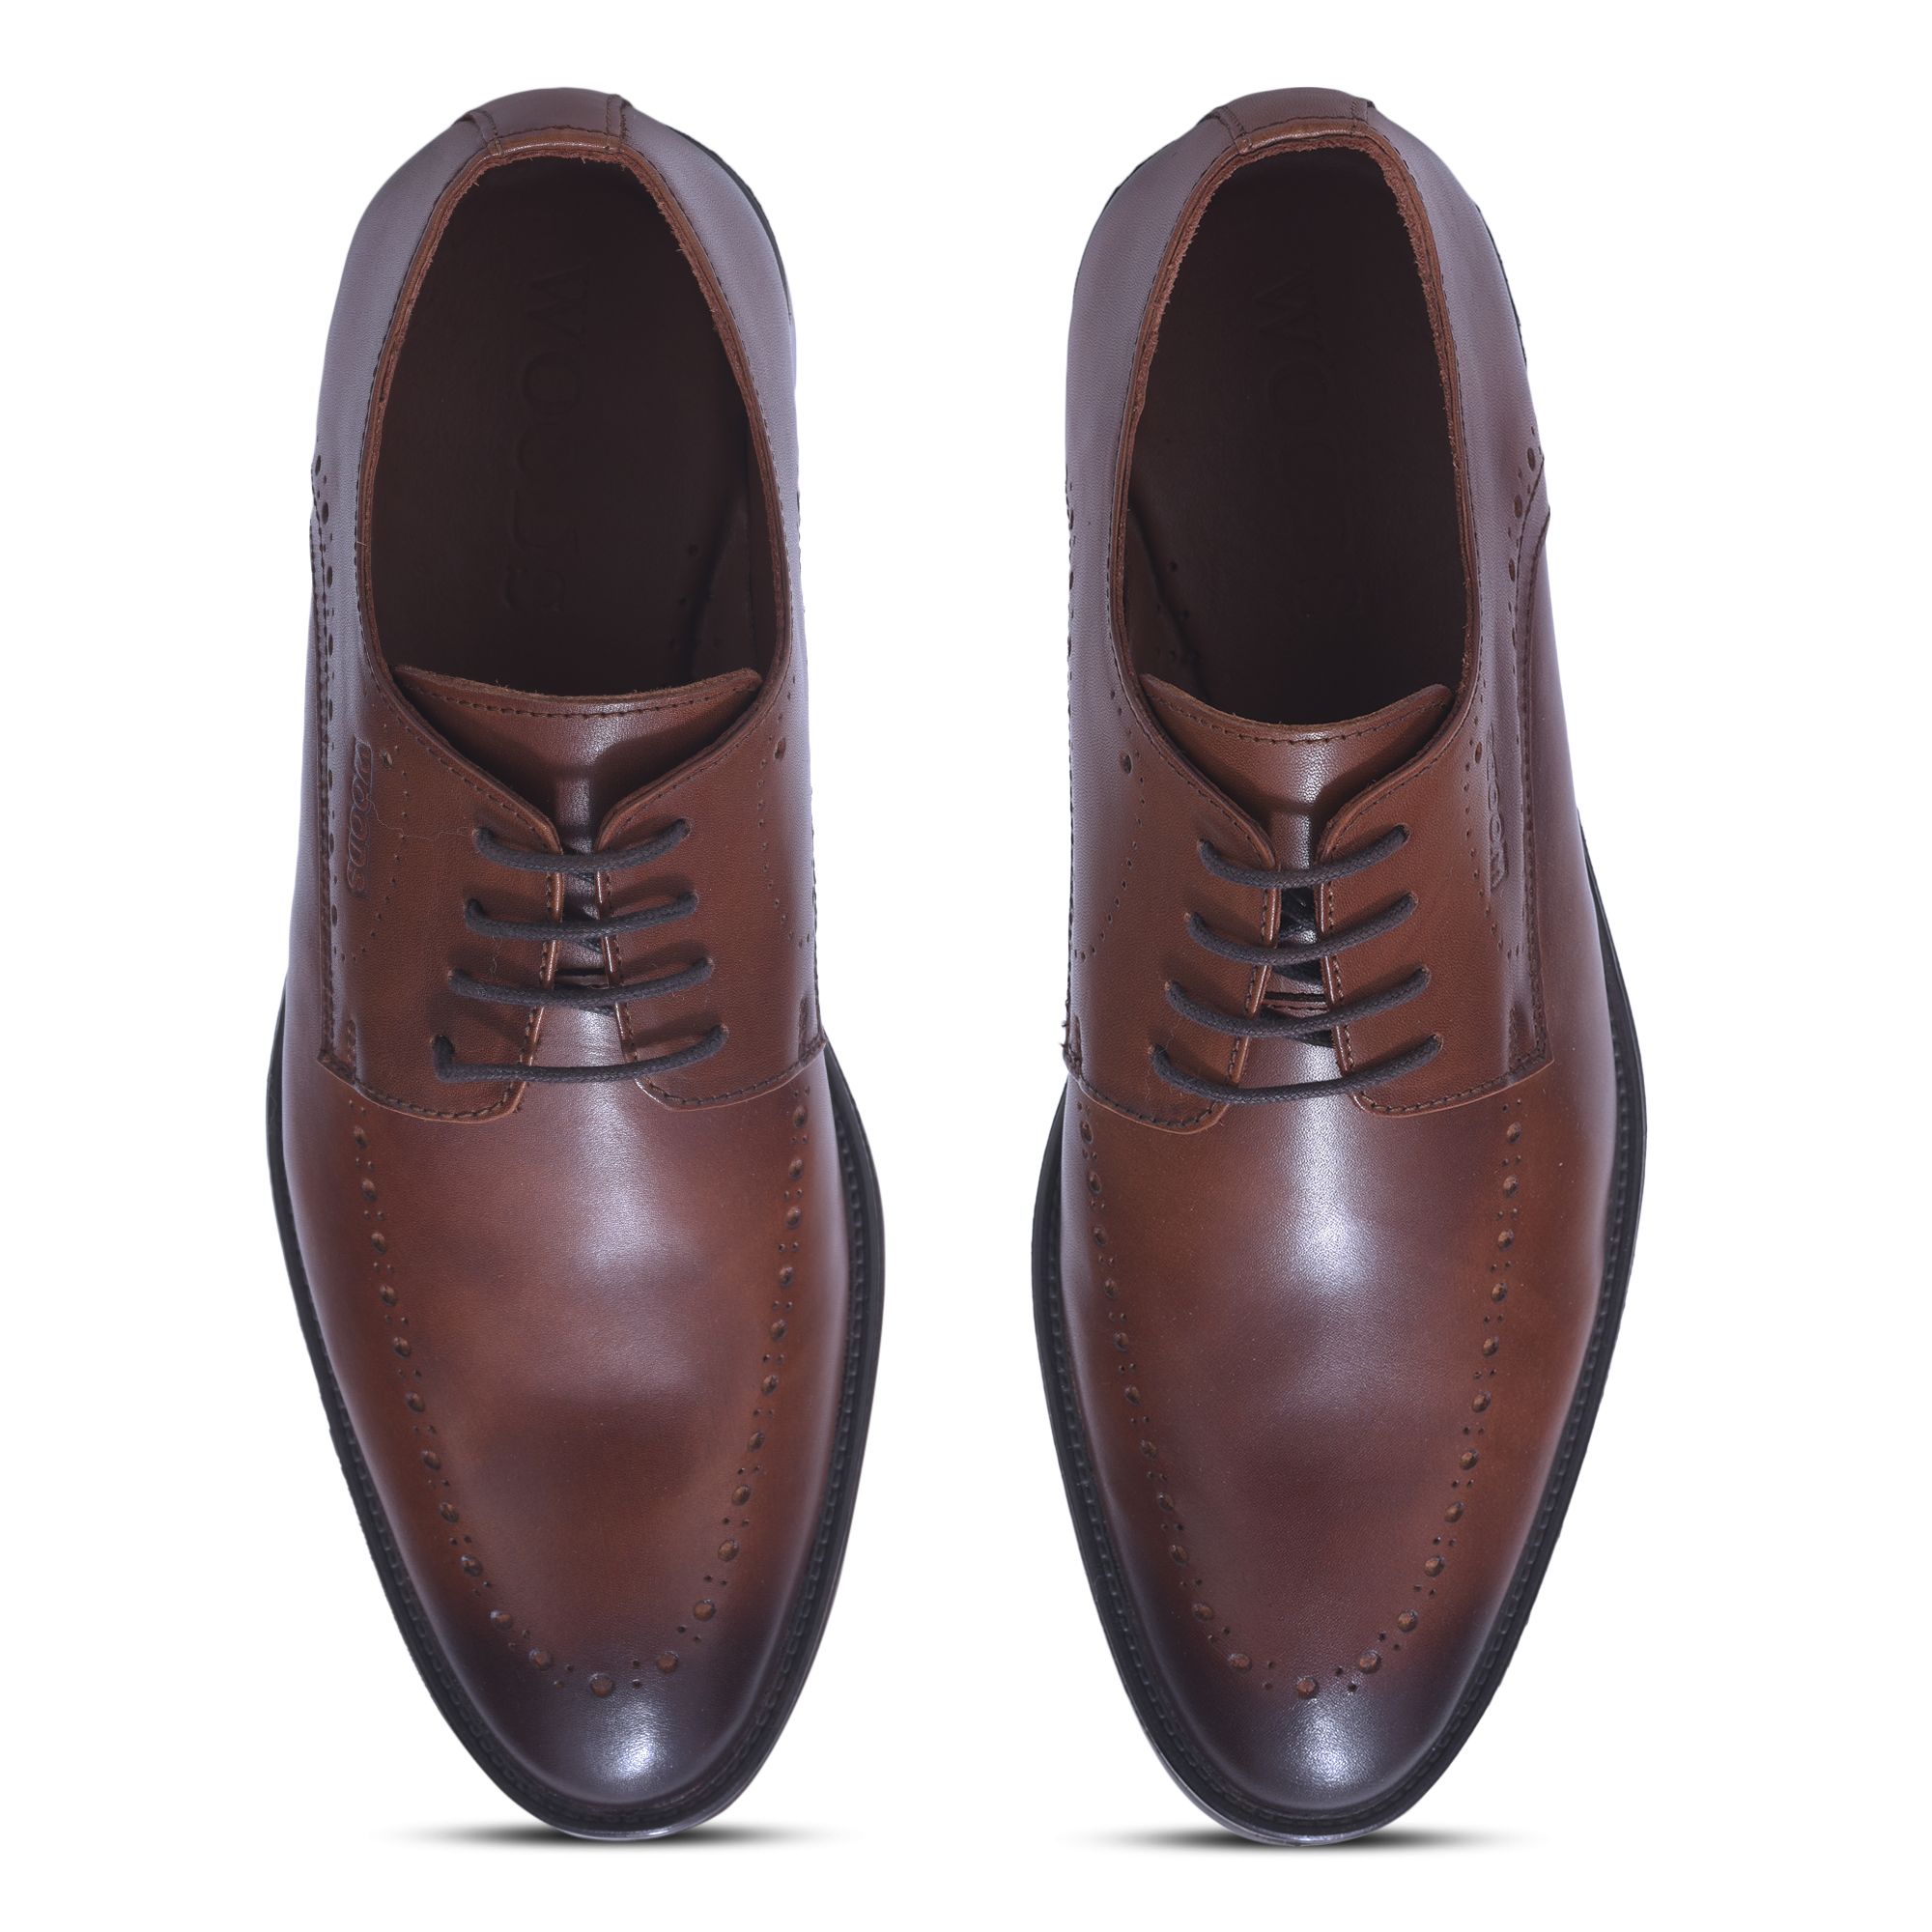 Woods TAN LEATHER FORMAL SHOES